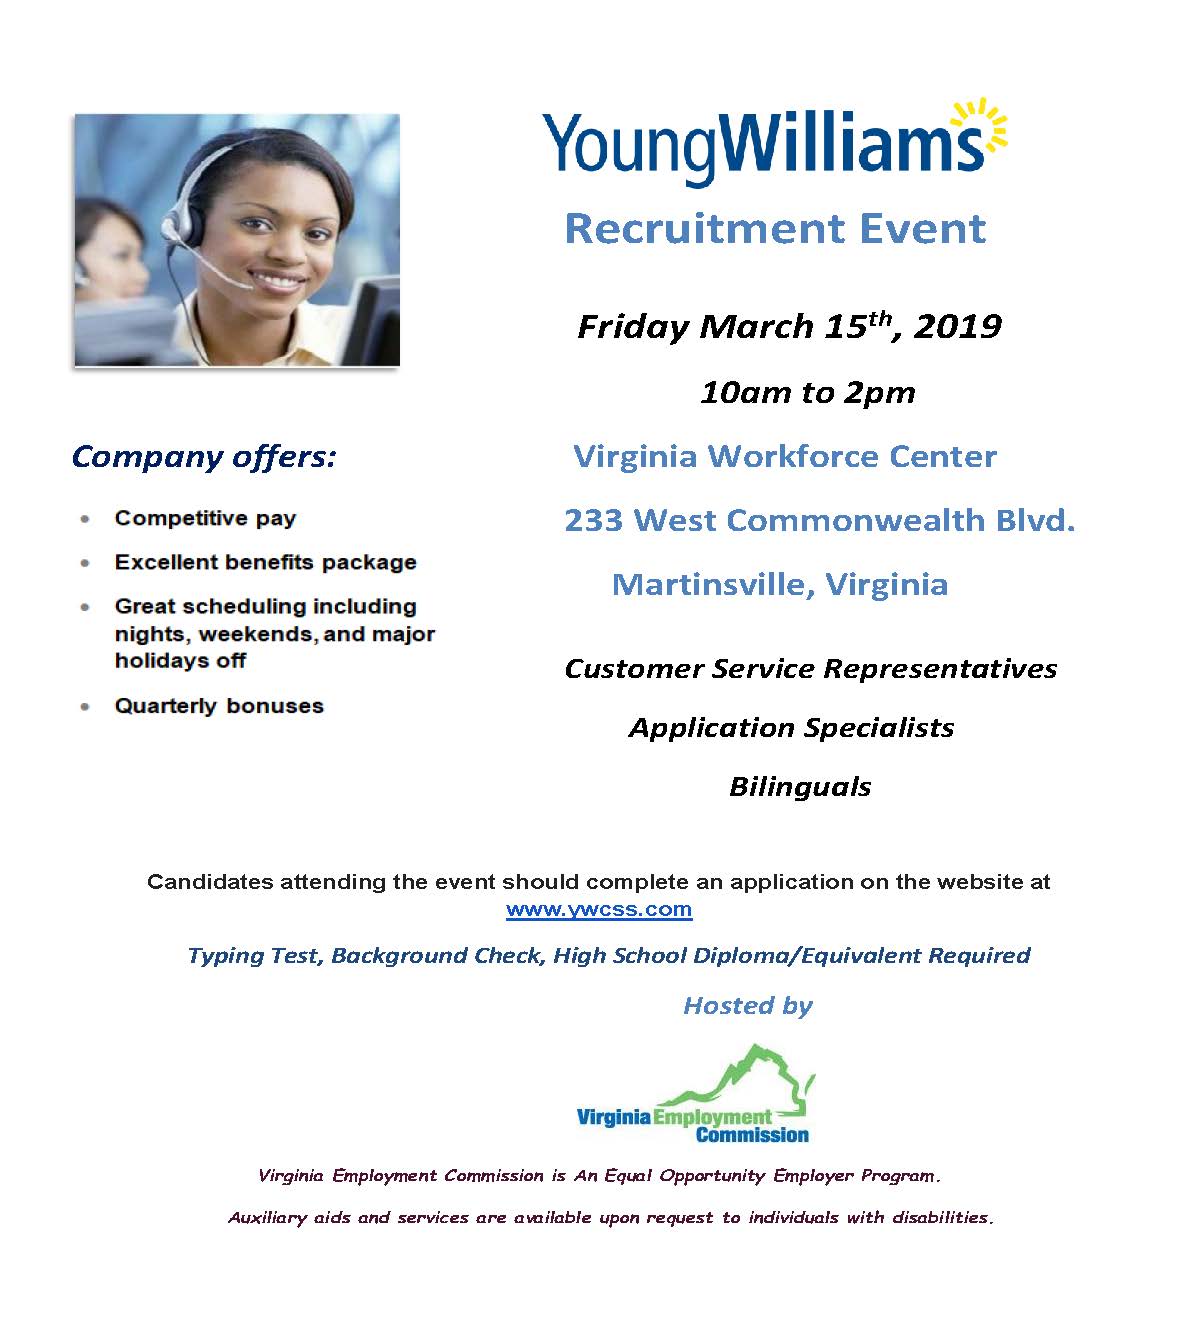 YoungWilliams Recruitment Event - March 15, 2019